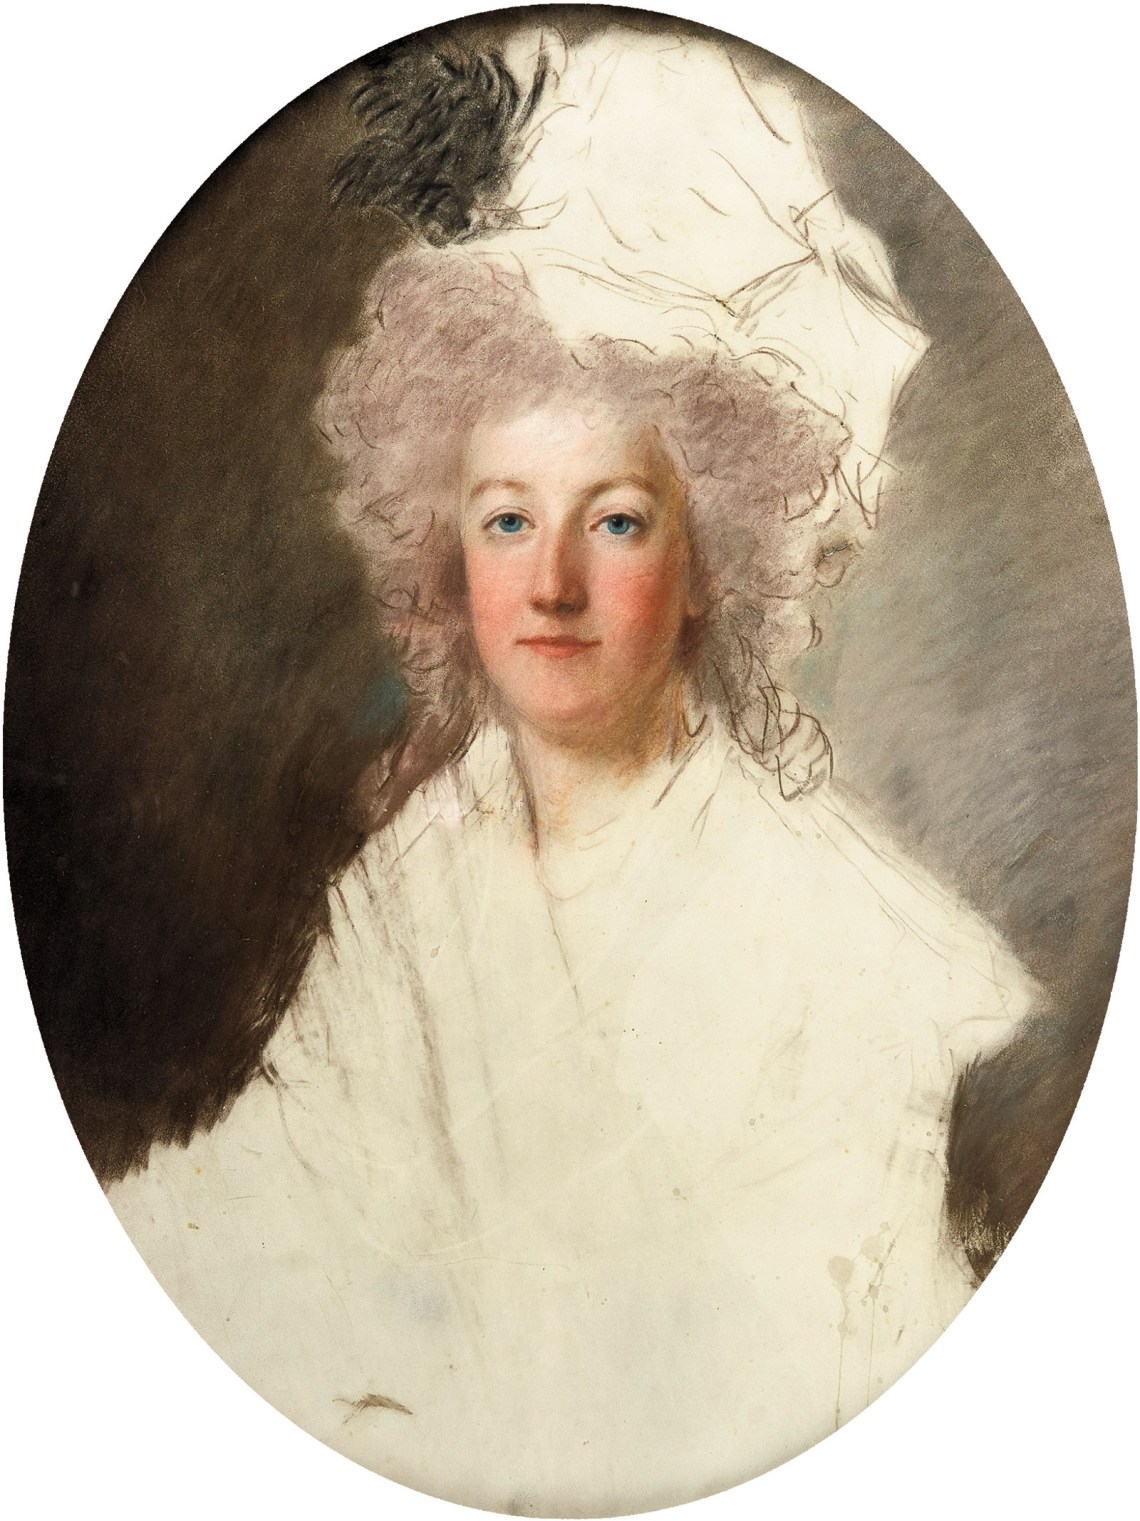 Marie Antoinette: Why Was She So Hated?